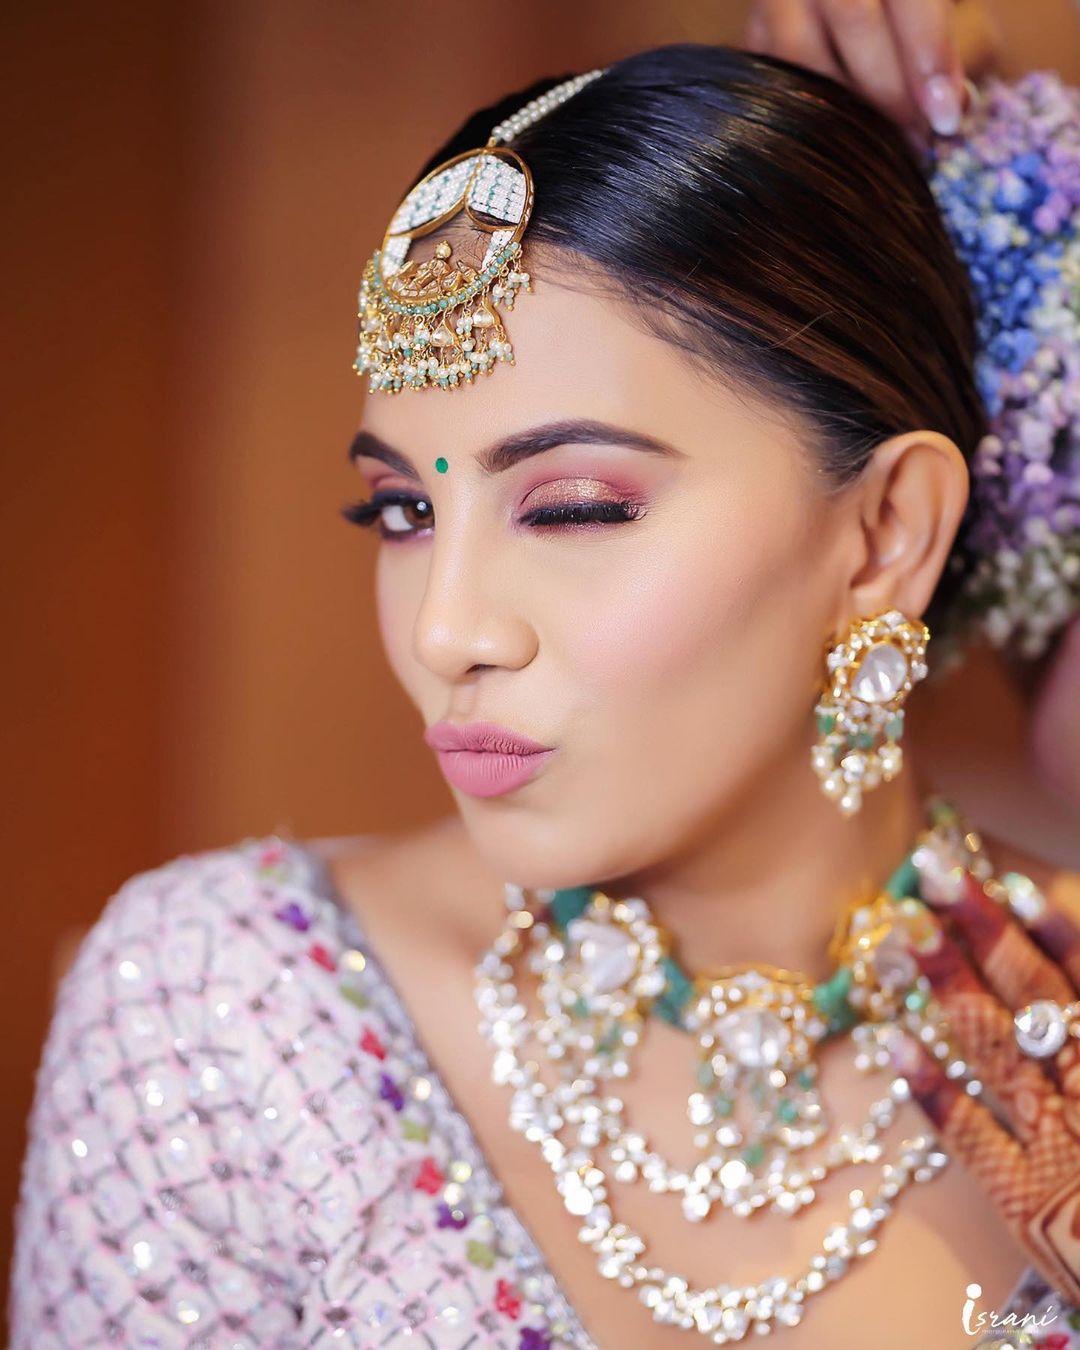 10 minimal makeup looks on real brides that we've fallen in love with! |  Bridal Wear | Wedding Blog